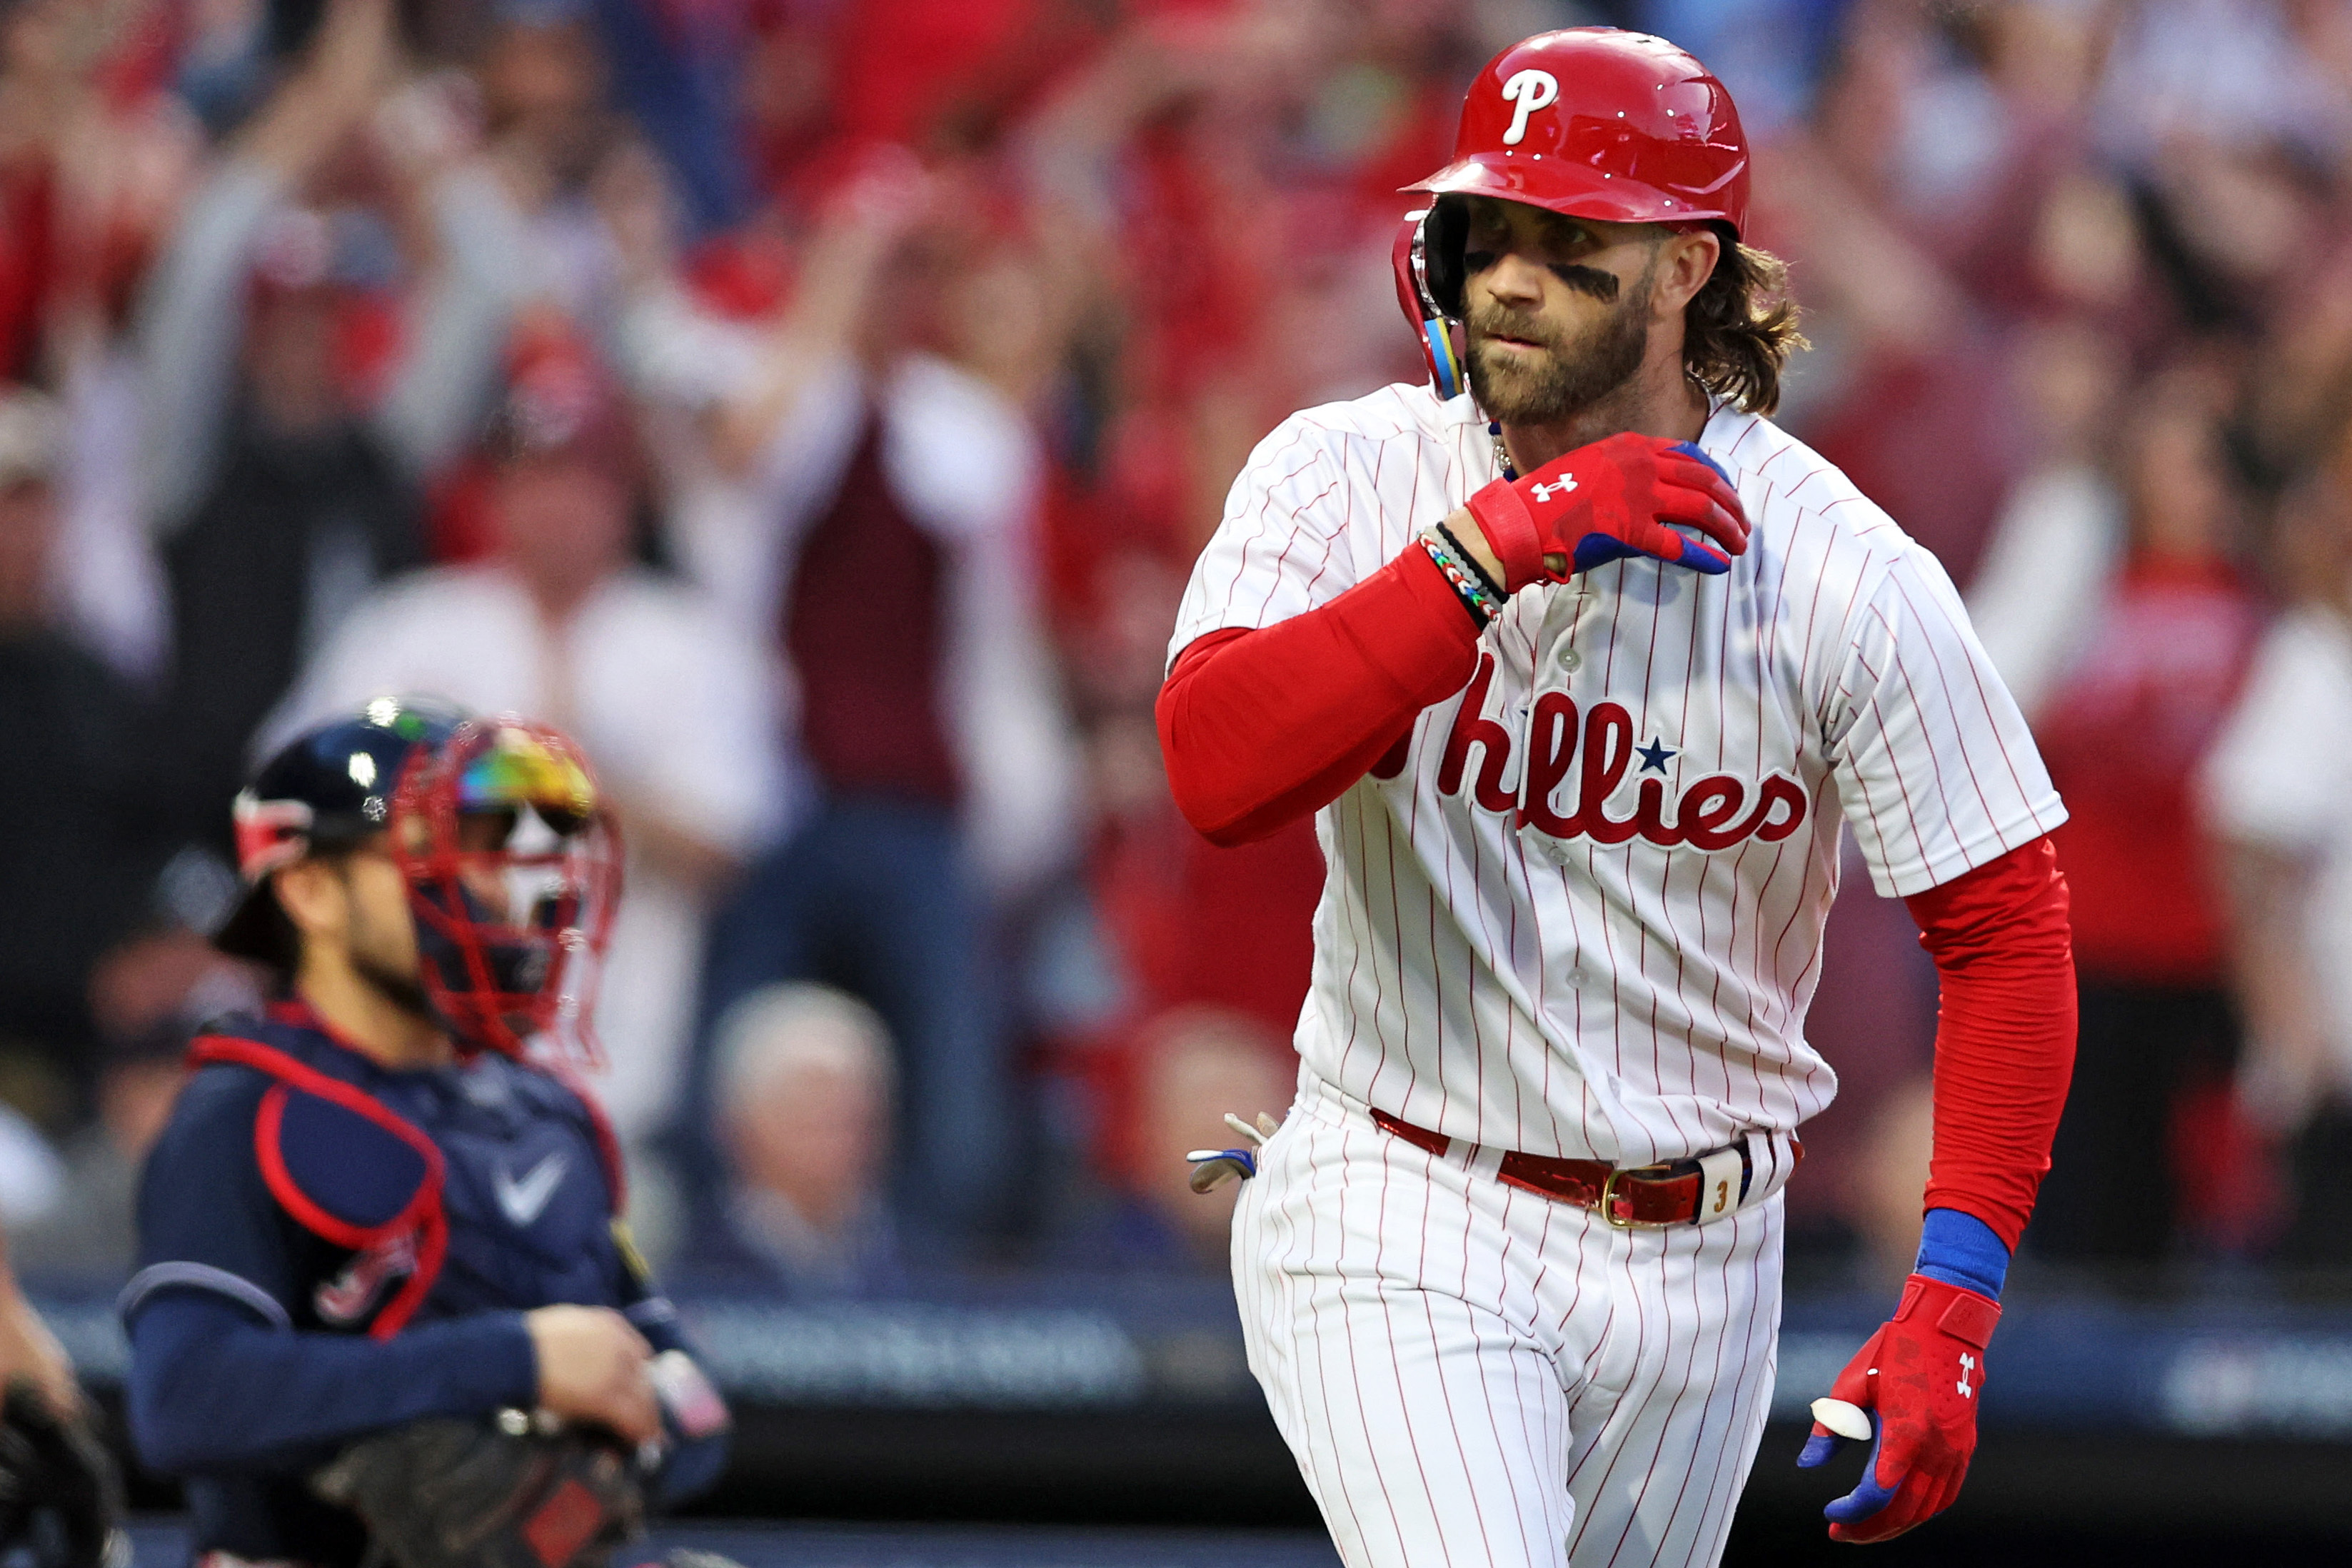 NLDS: Phillies Beat Braves to Take 2-1 Series Lead - The New York